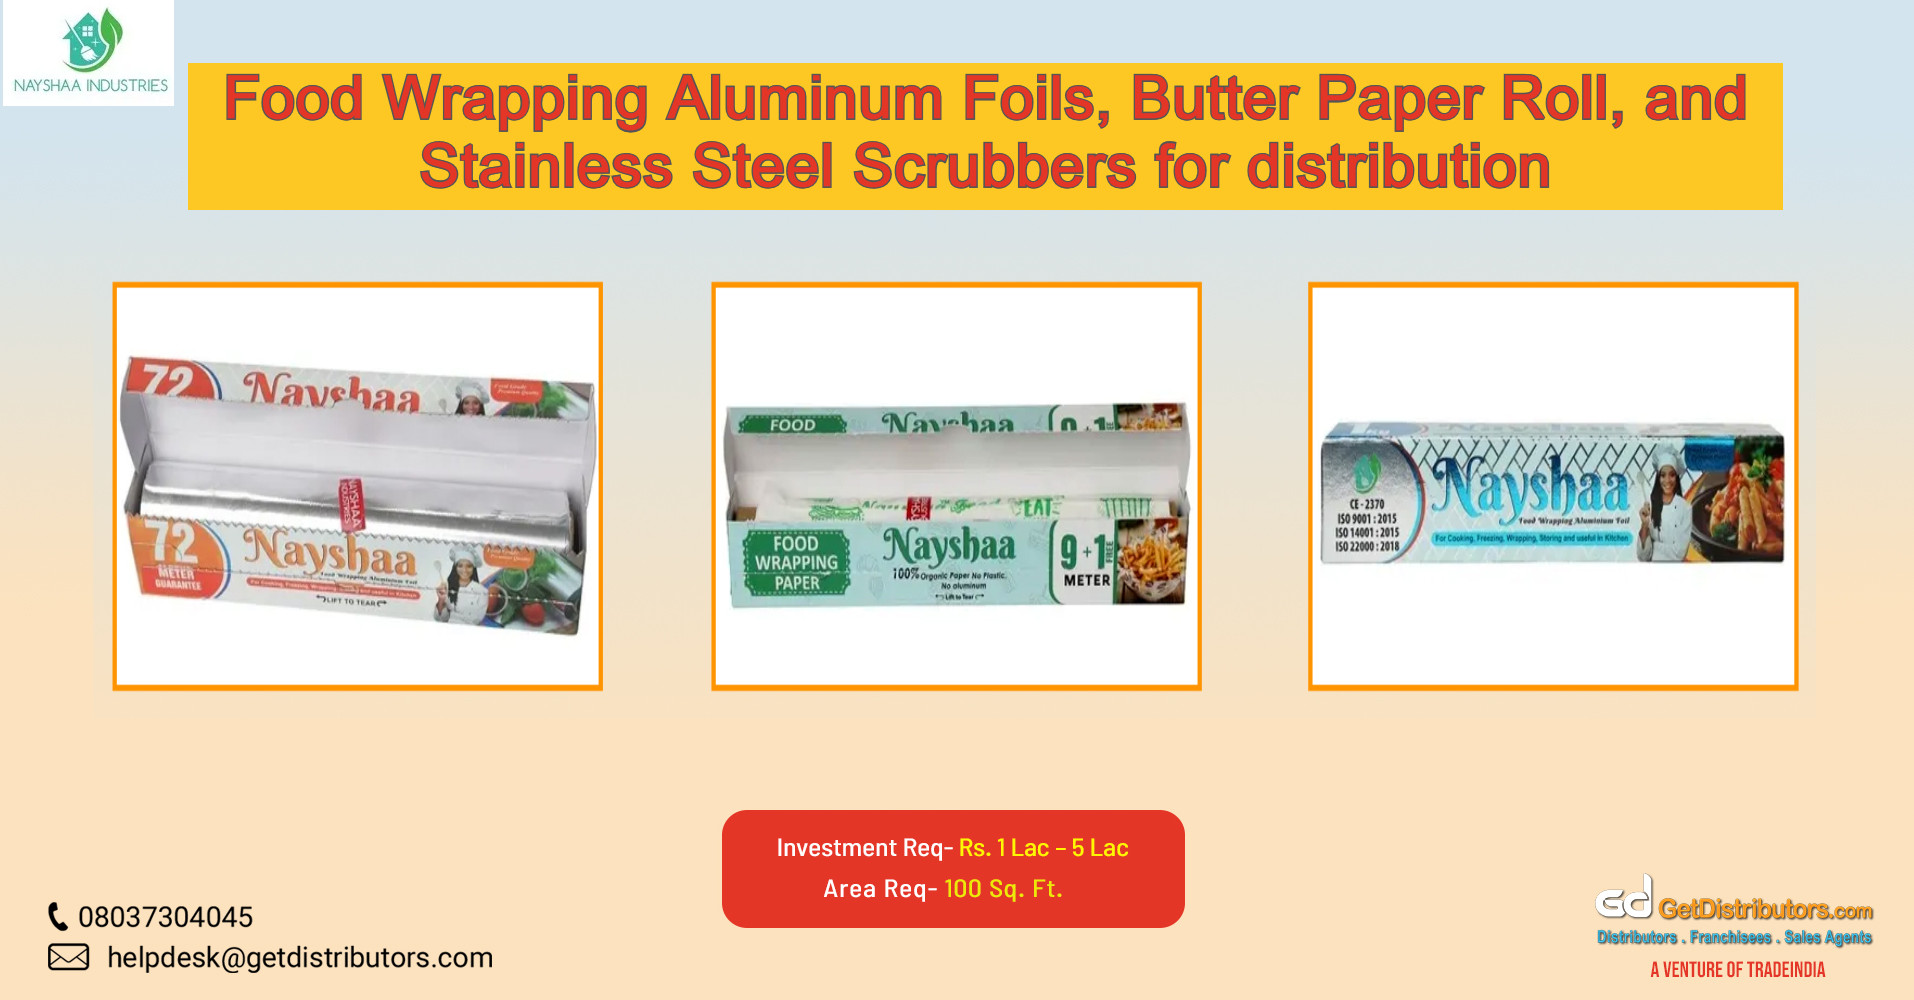 Food Wrapping Aluminum Foils, Butter Paper Roll, and Stainless Steel Scrubbers for distribution